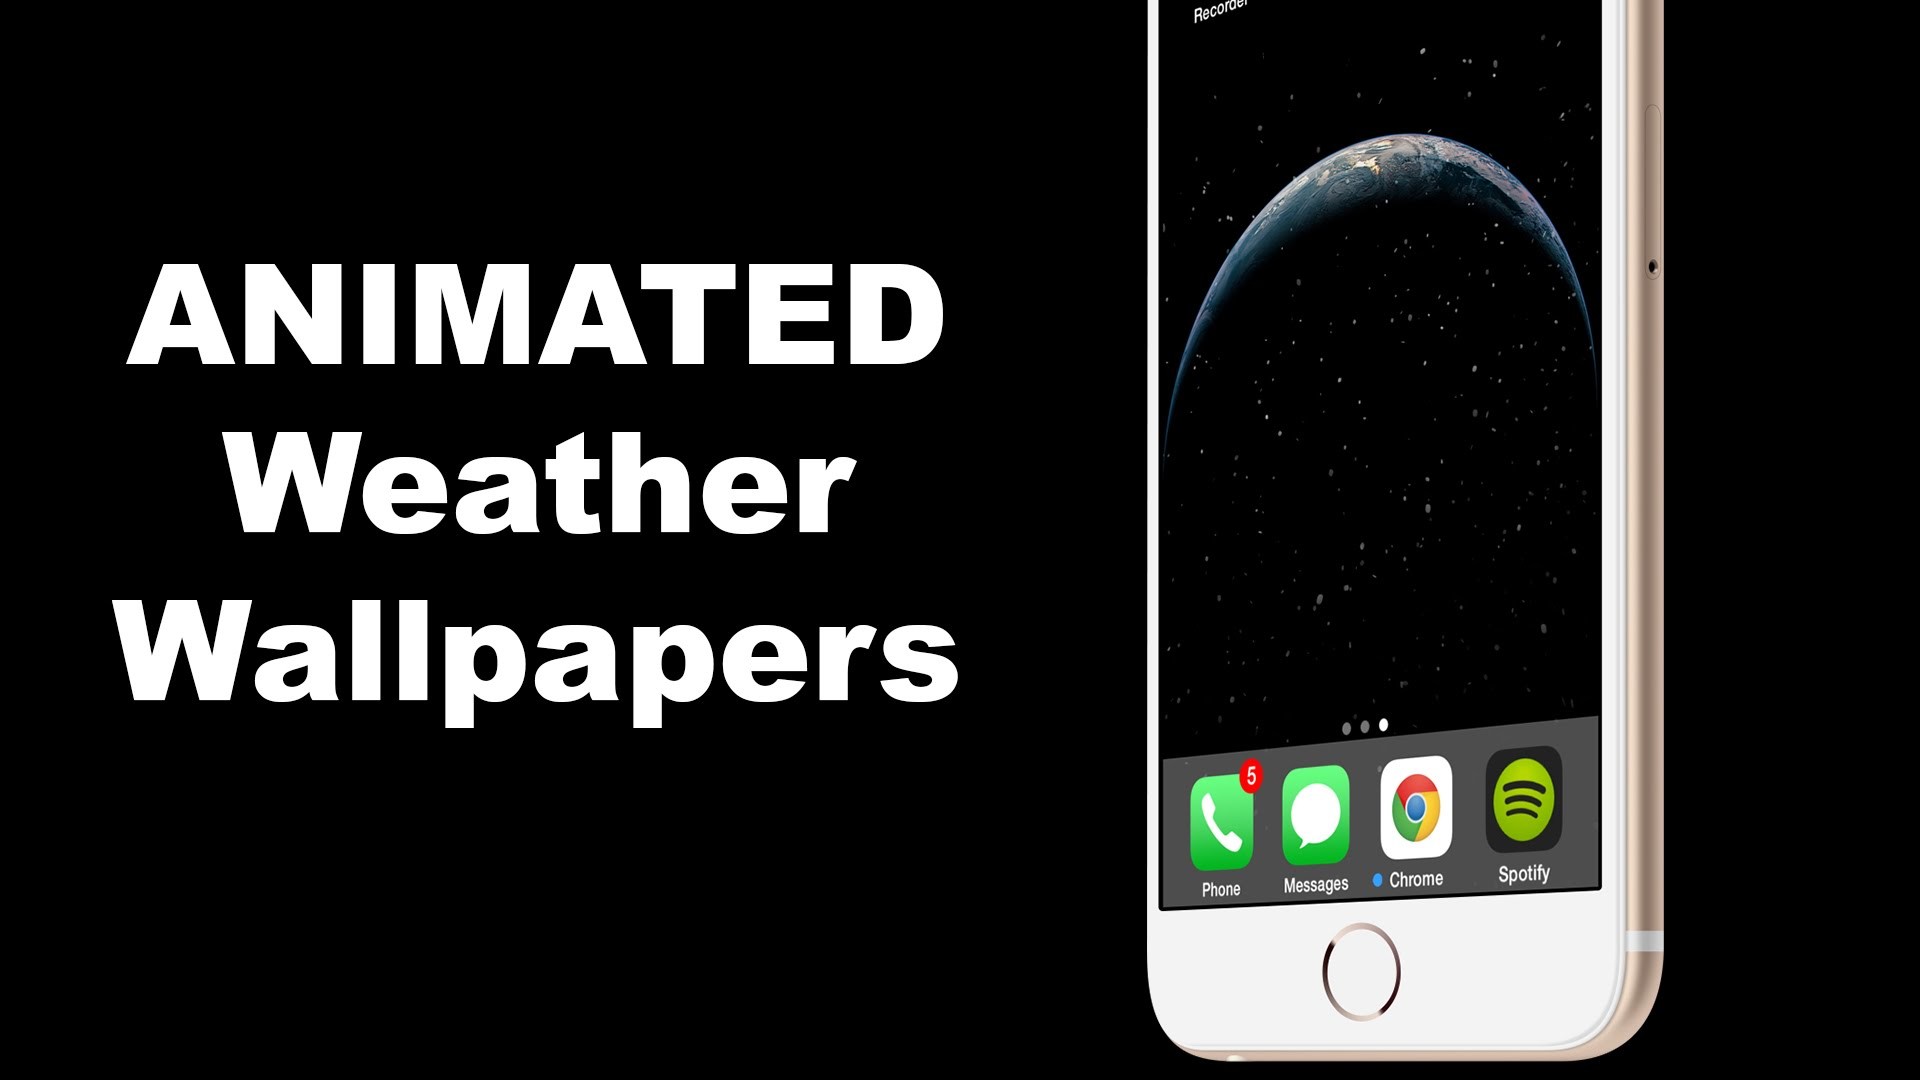 1920x1080 How To Add Changing ANIMATED Weather Wallpapers for iOS 8 and iOS 8.1 -  YouTube